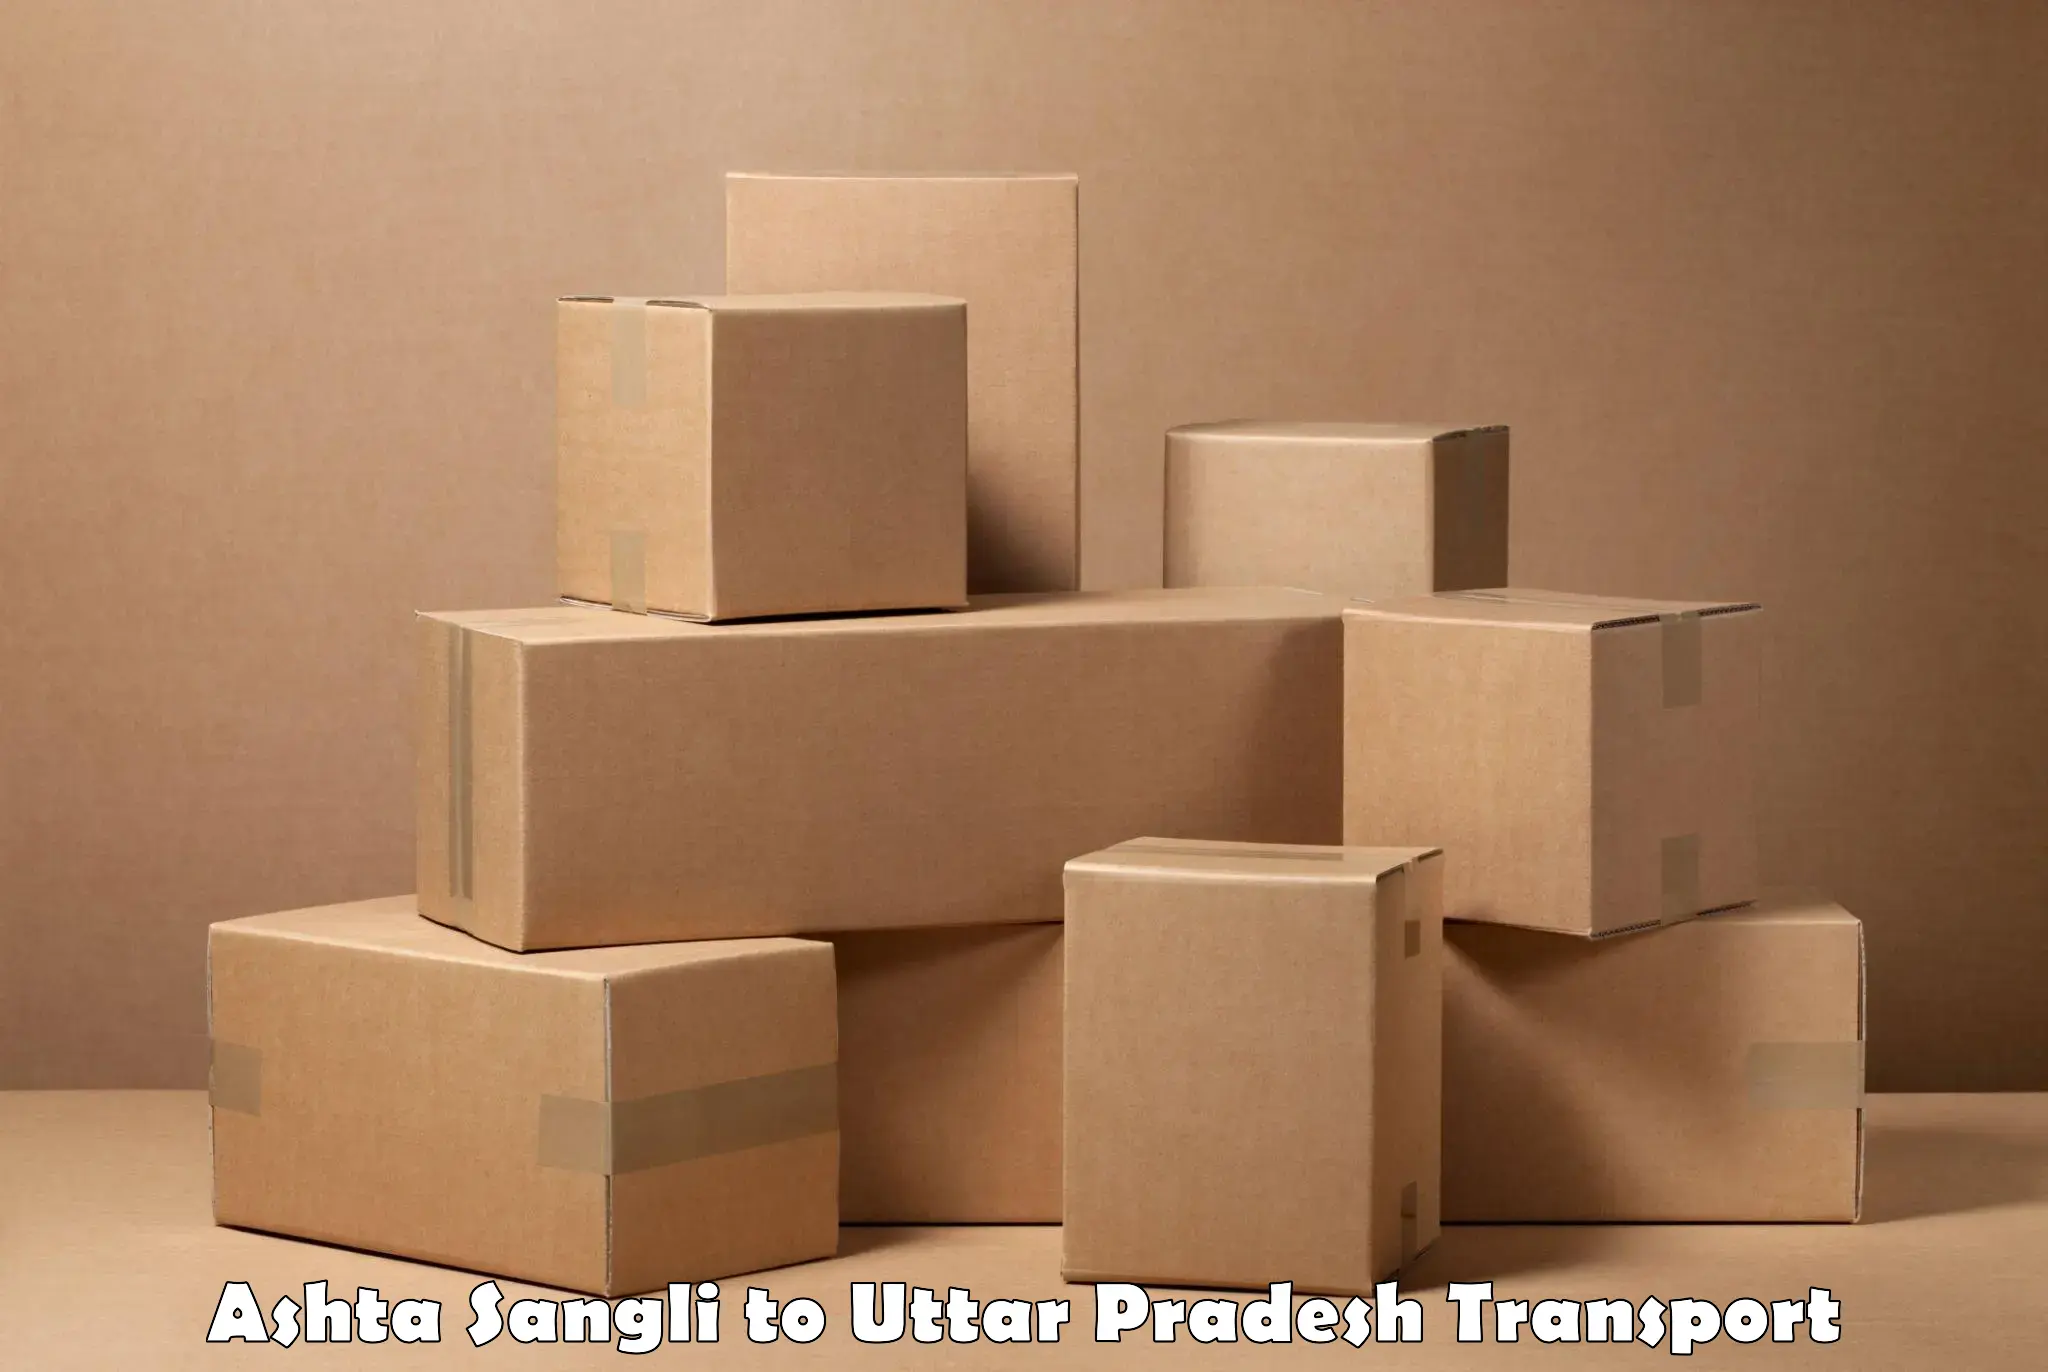 Container transport service Ashta Sangli to Dhanghata